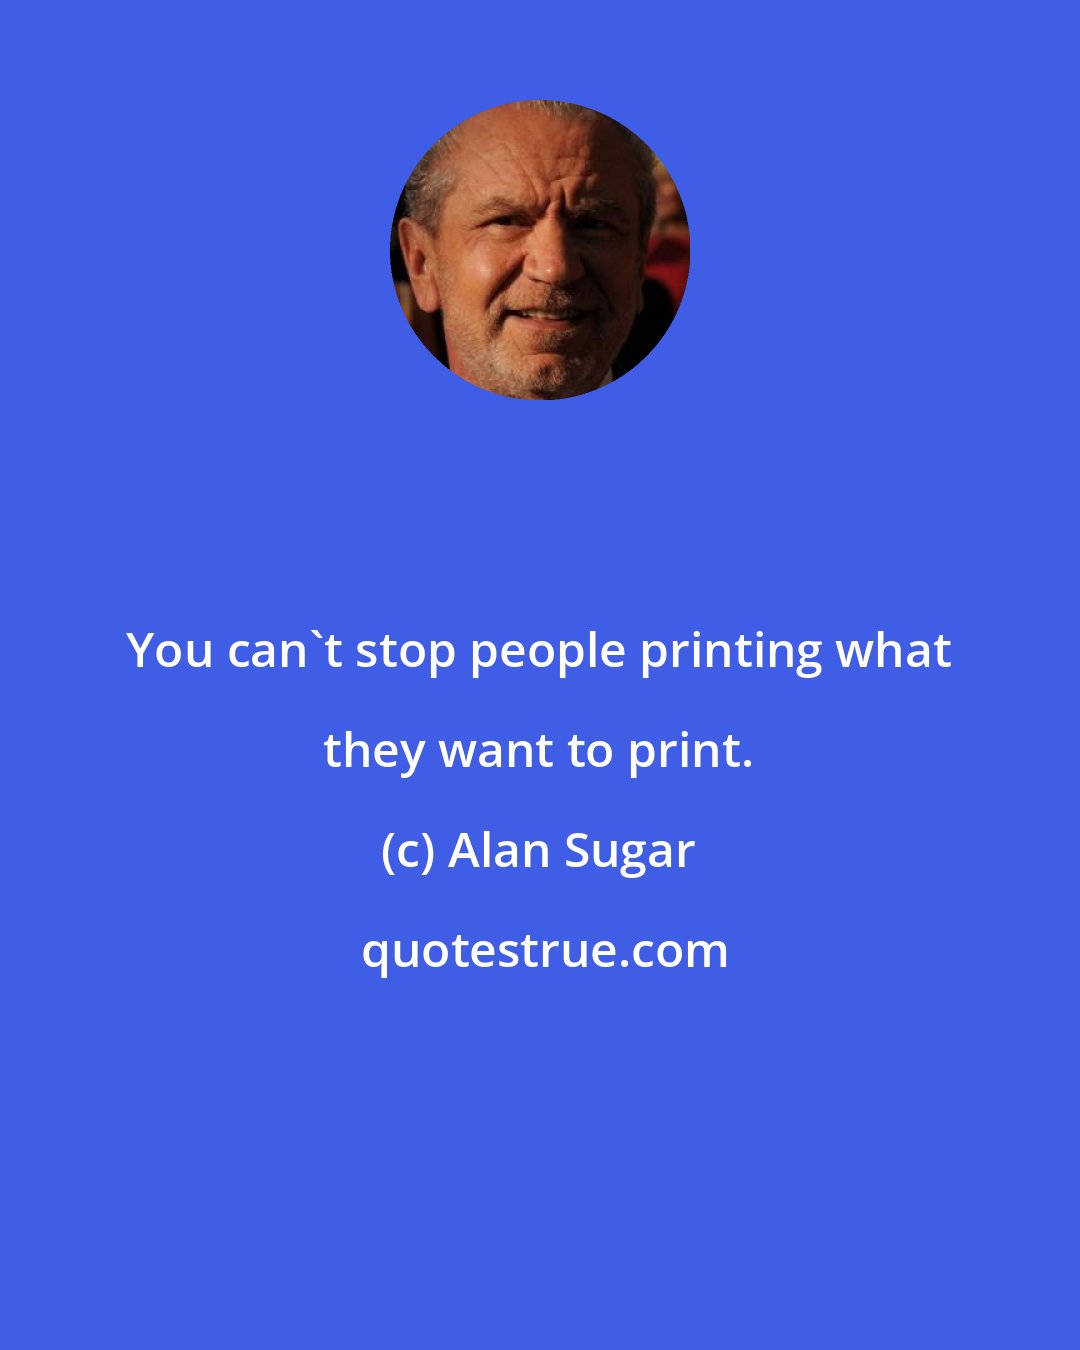 Alan Sugar: You can't stop people printing what they want to print.